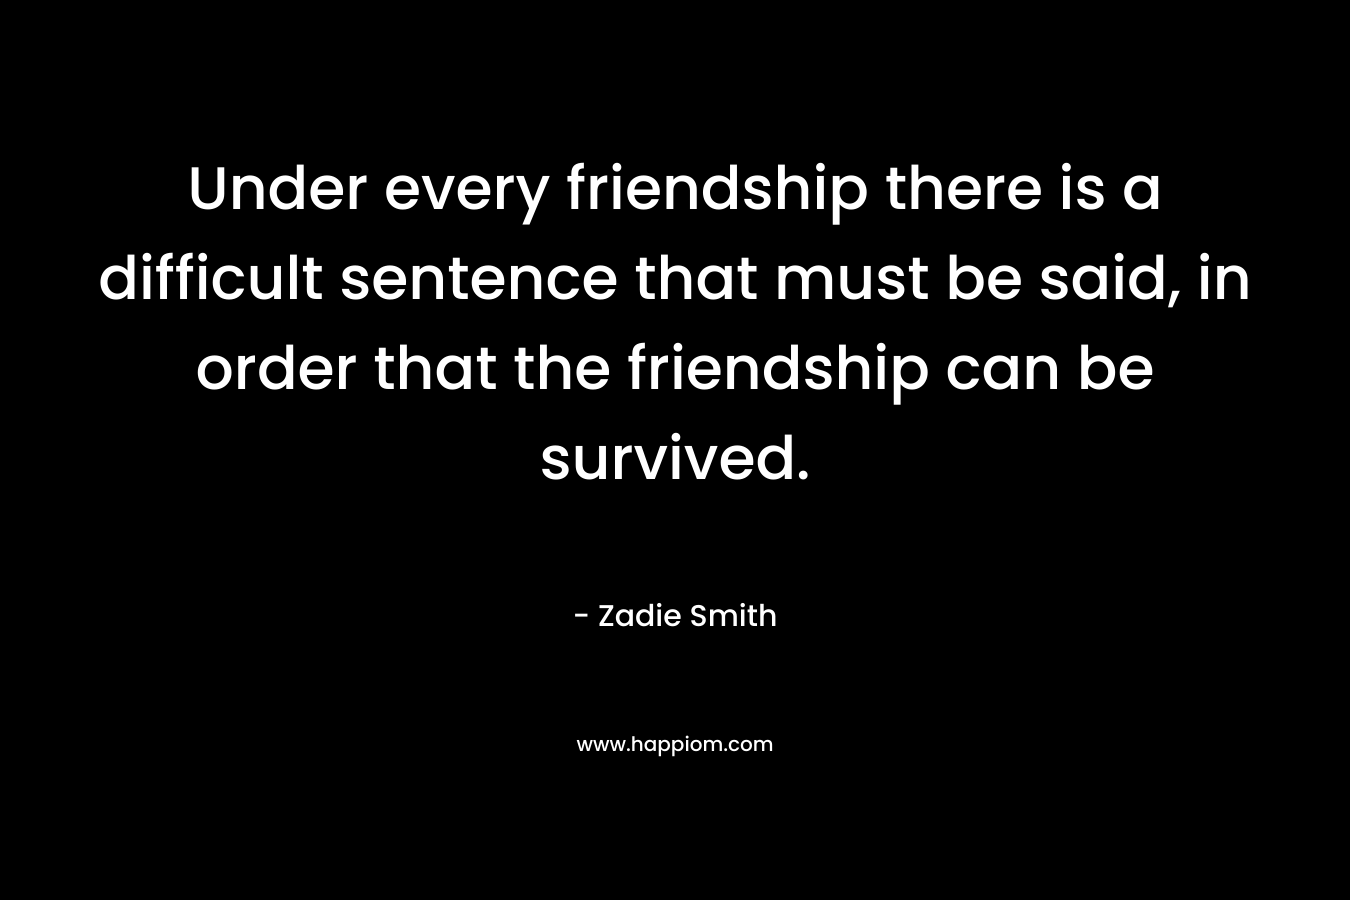 Under every friendship there is a difficult sentence that must be said, in order that the friendship can be survived. – Zadie Smith